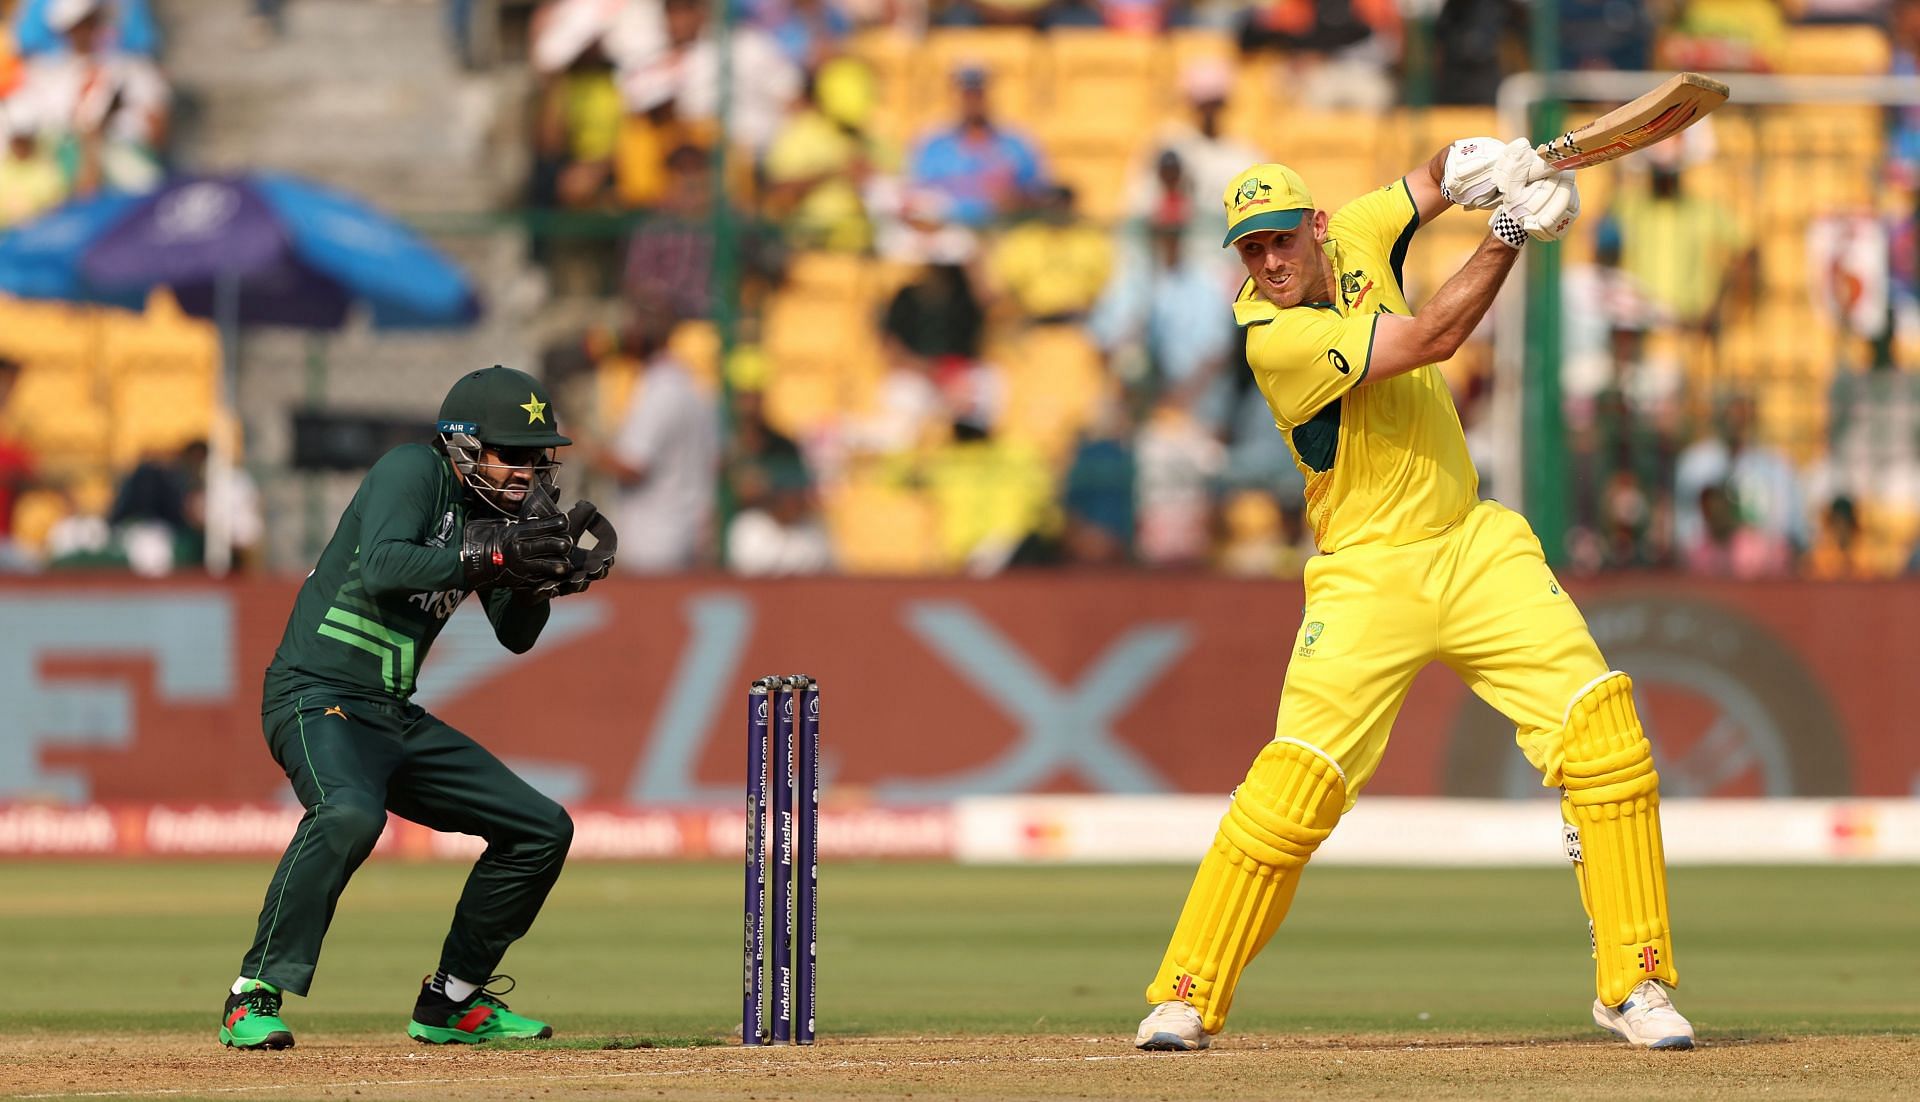 Mitchell Marsh excelled with the bat in the World Cup. (Pic: Getty Images)